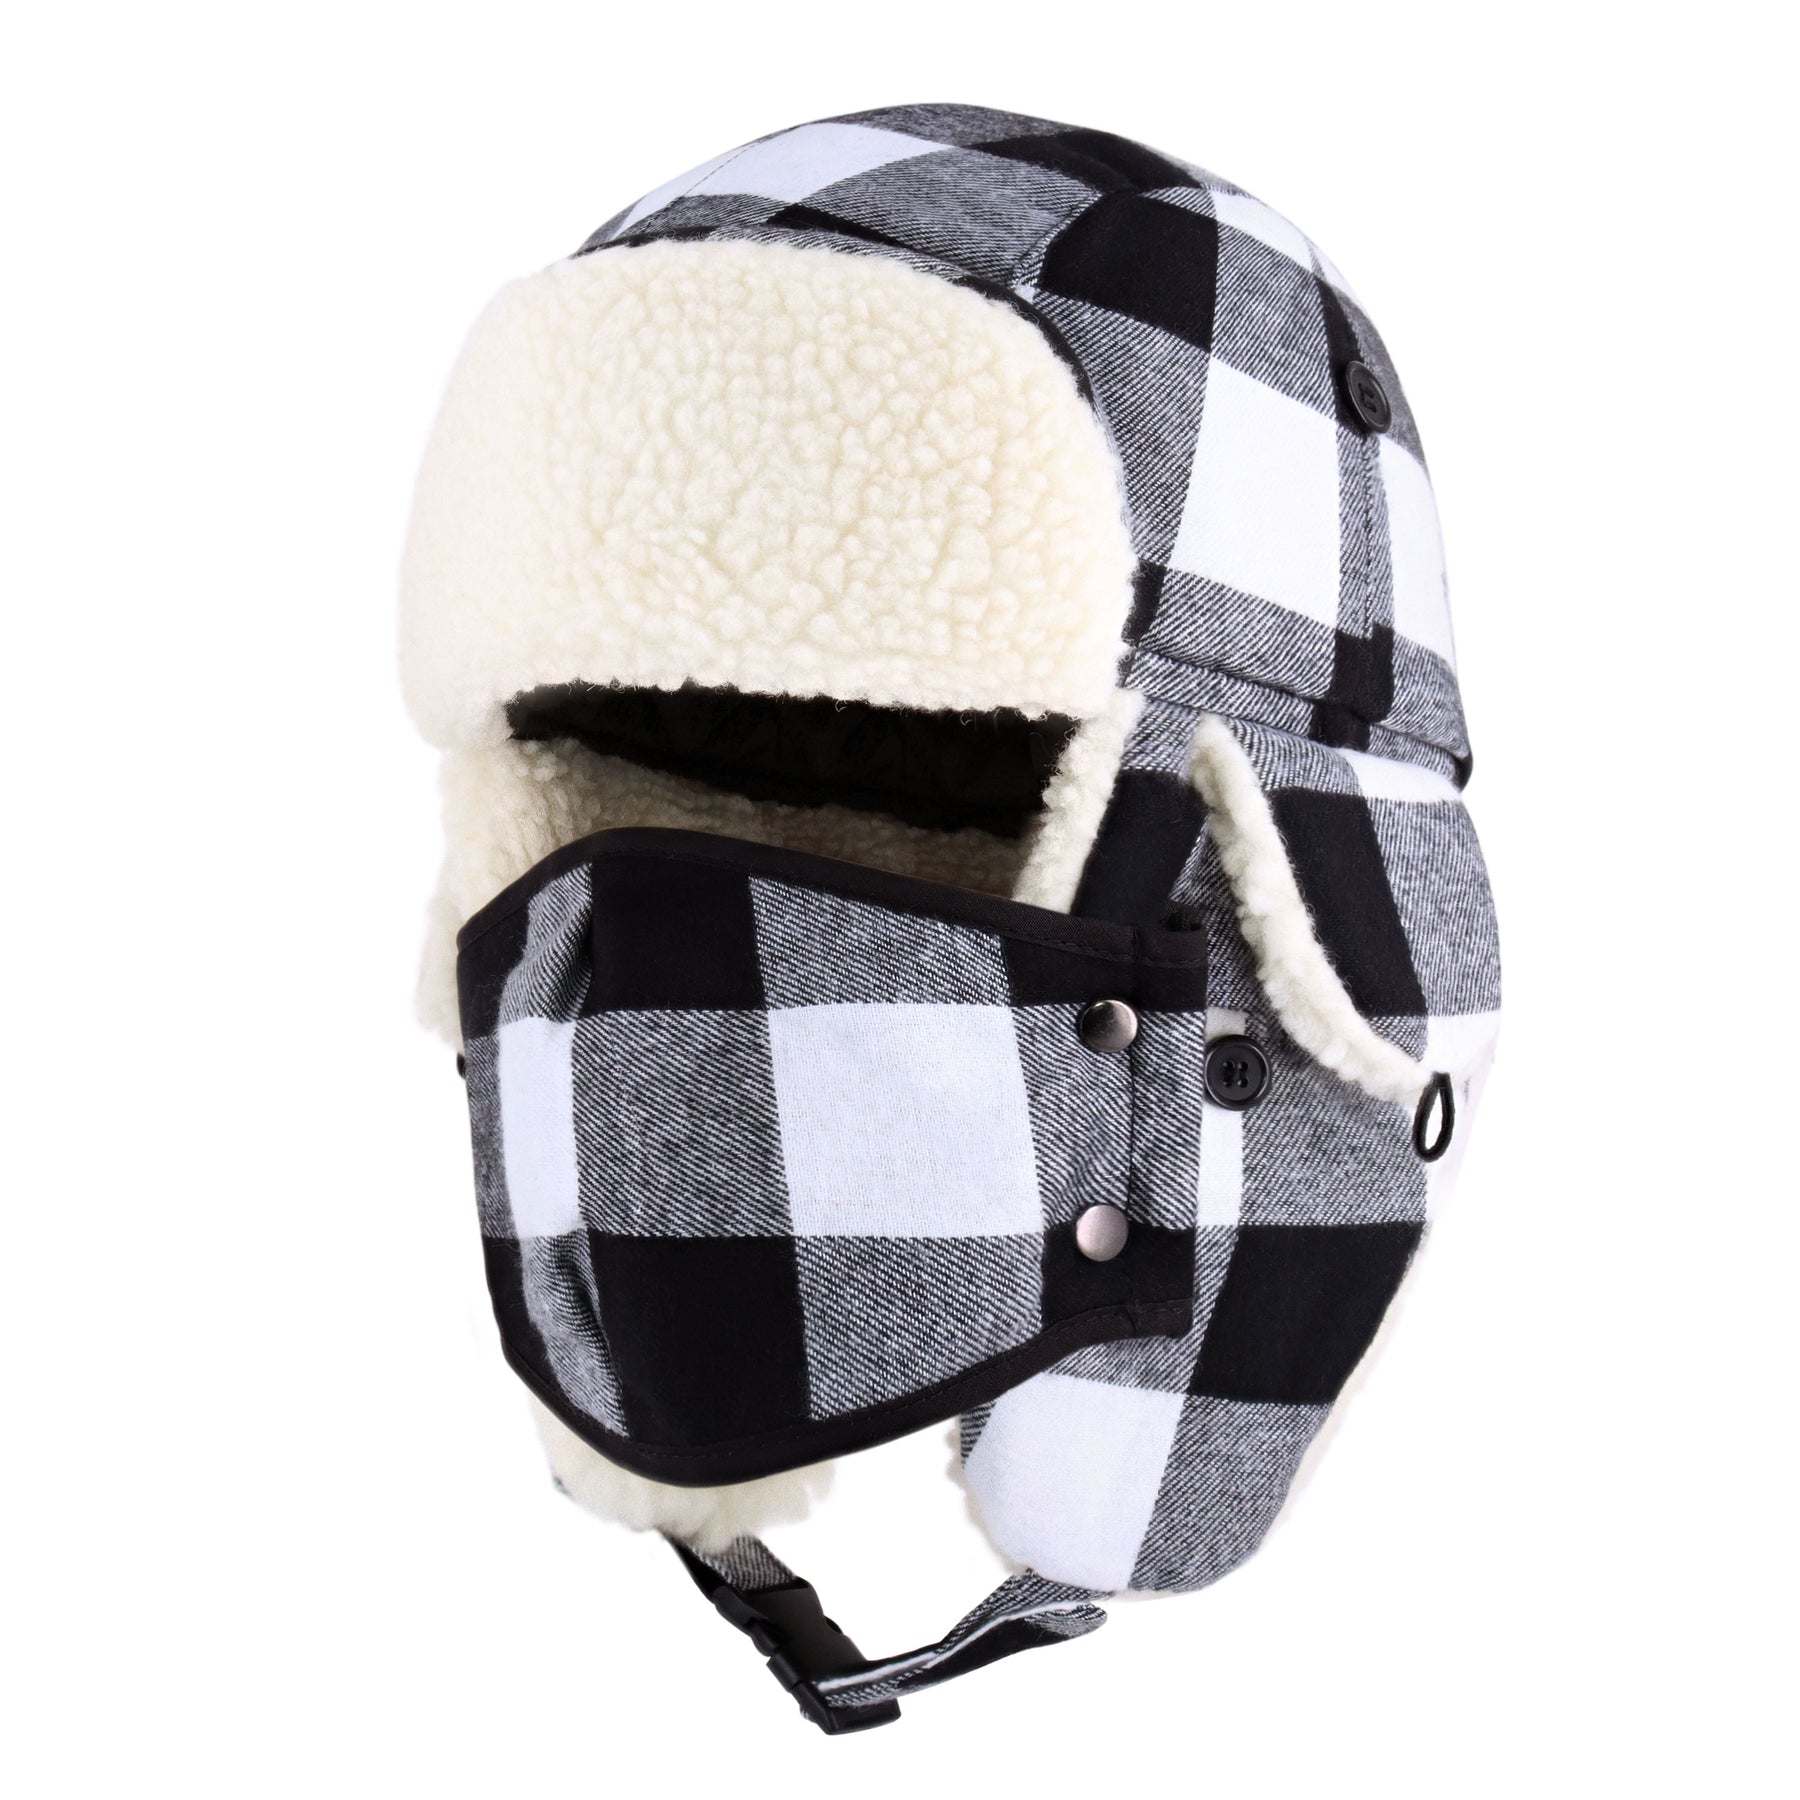 CHOK.LIDS Waterproof Winter Trapper Bomber Hat with Detachable Mask